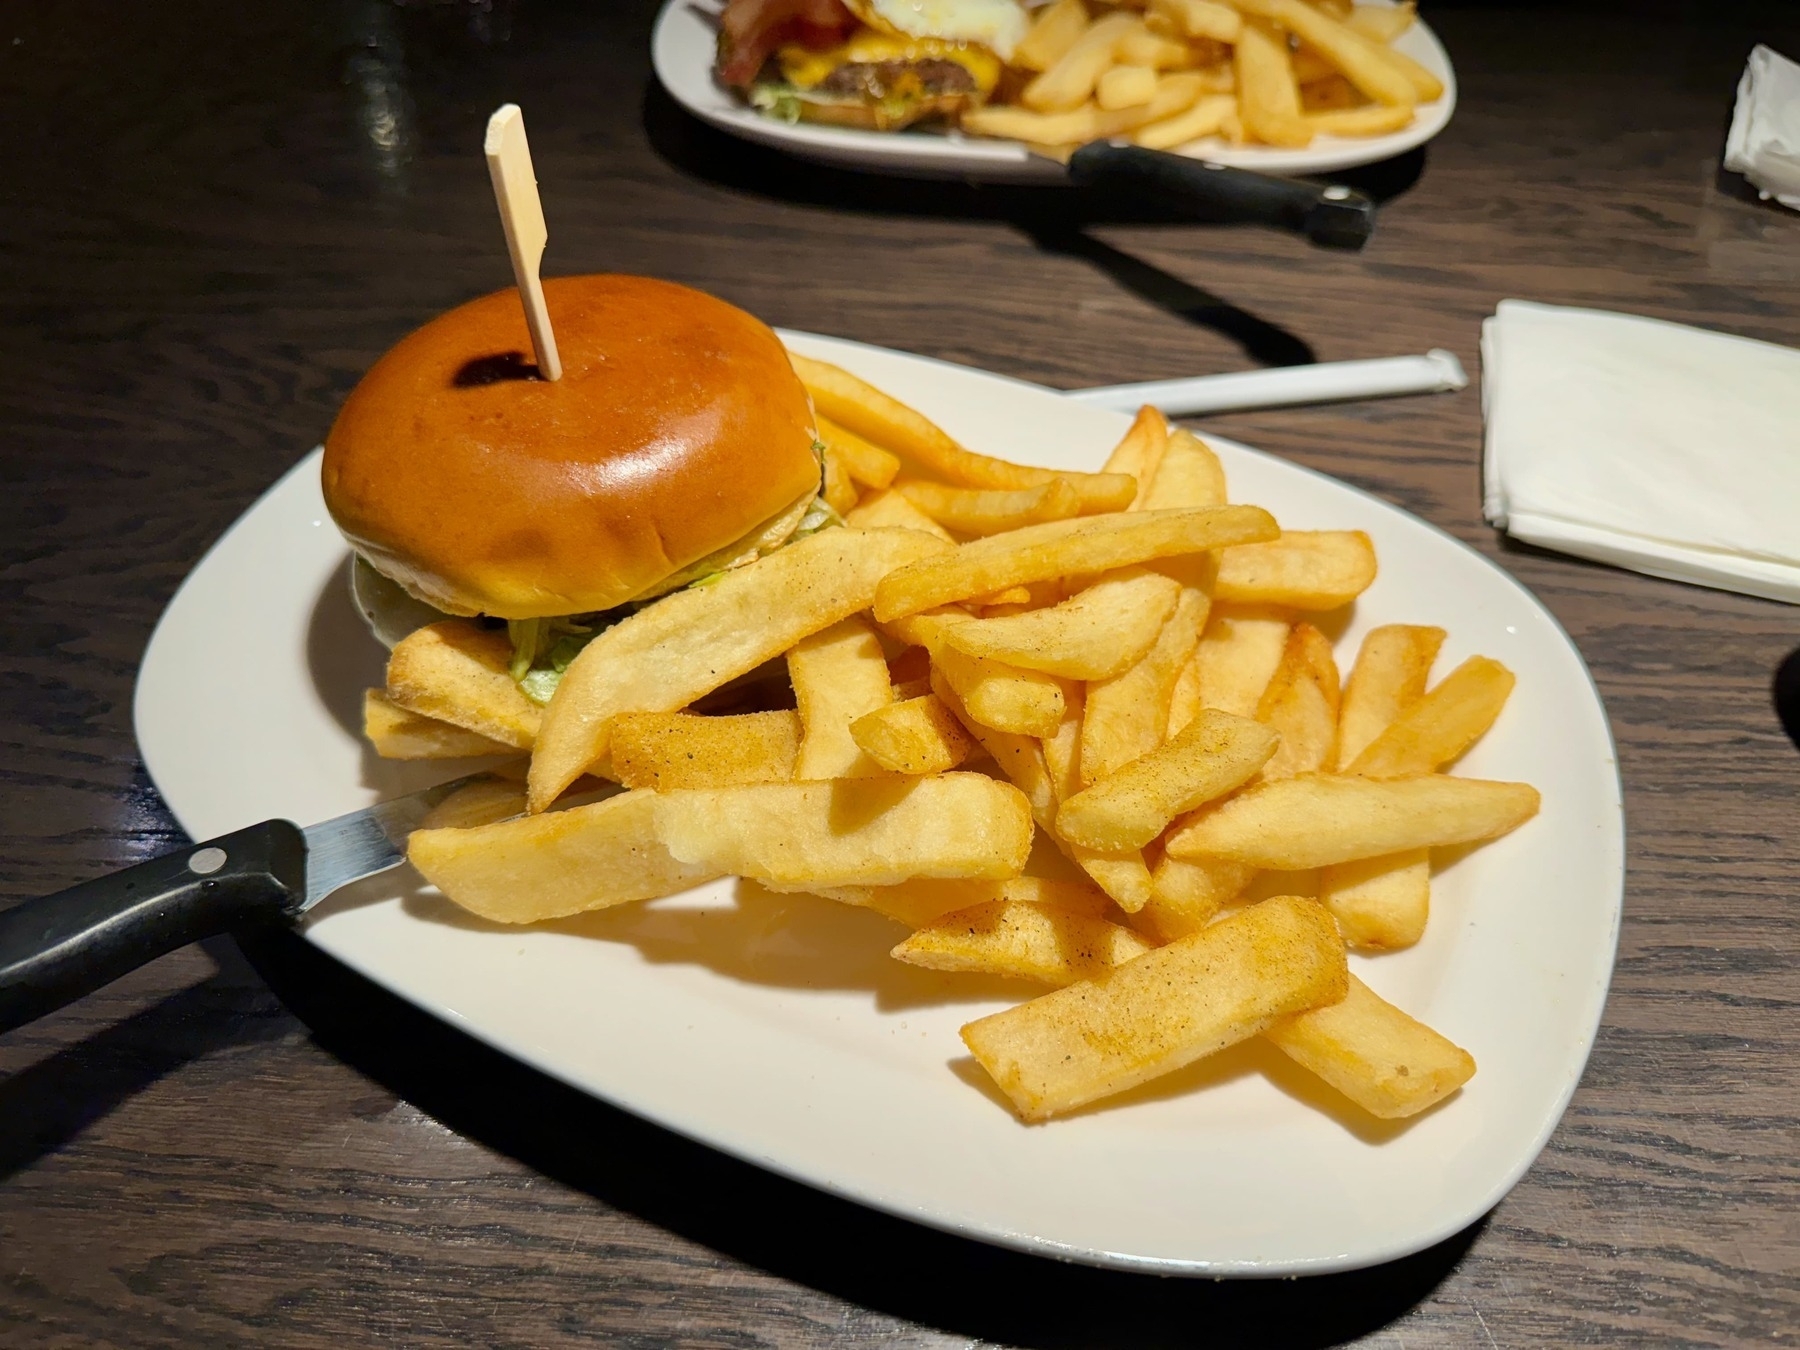 Two plates on a dark wood table, on two oval-ish white plates; fries on both of the plates but the plate in the foreground has a knife on it, as well as a burger.